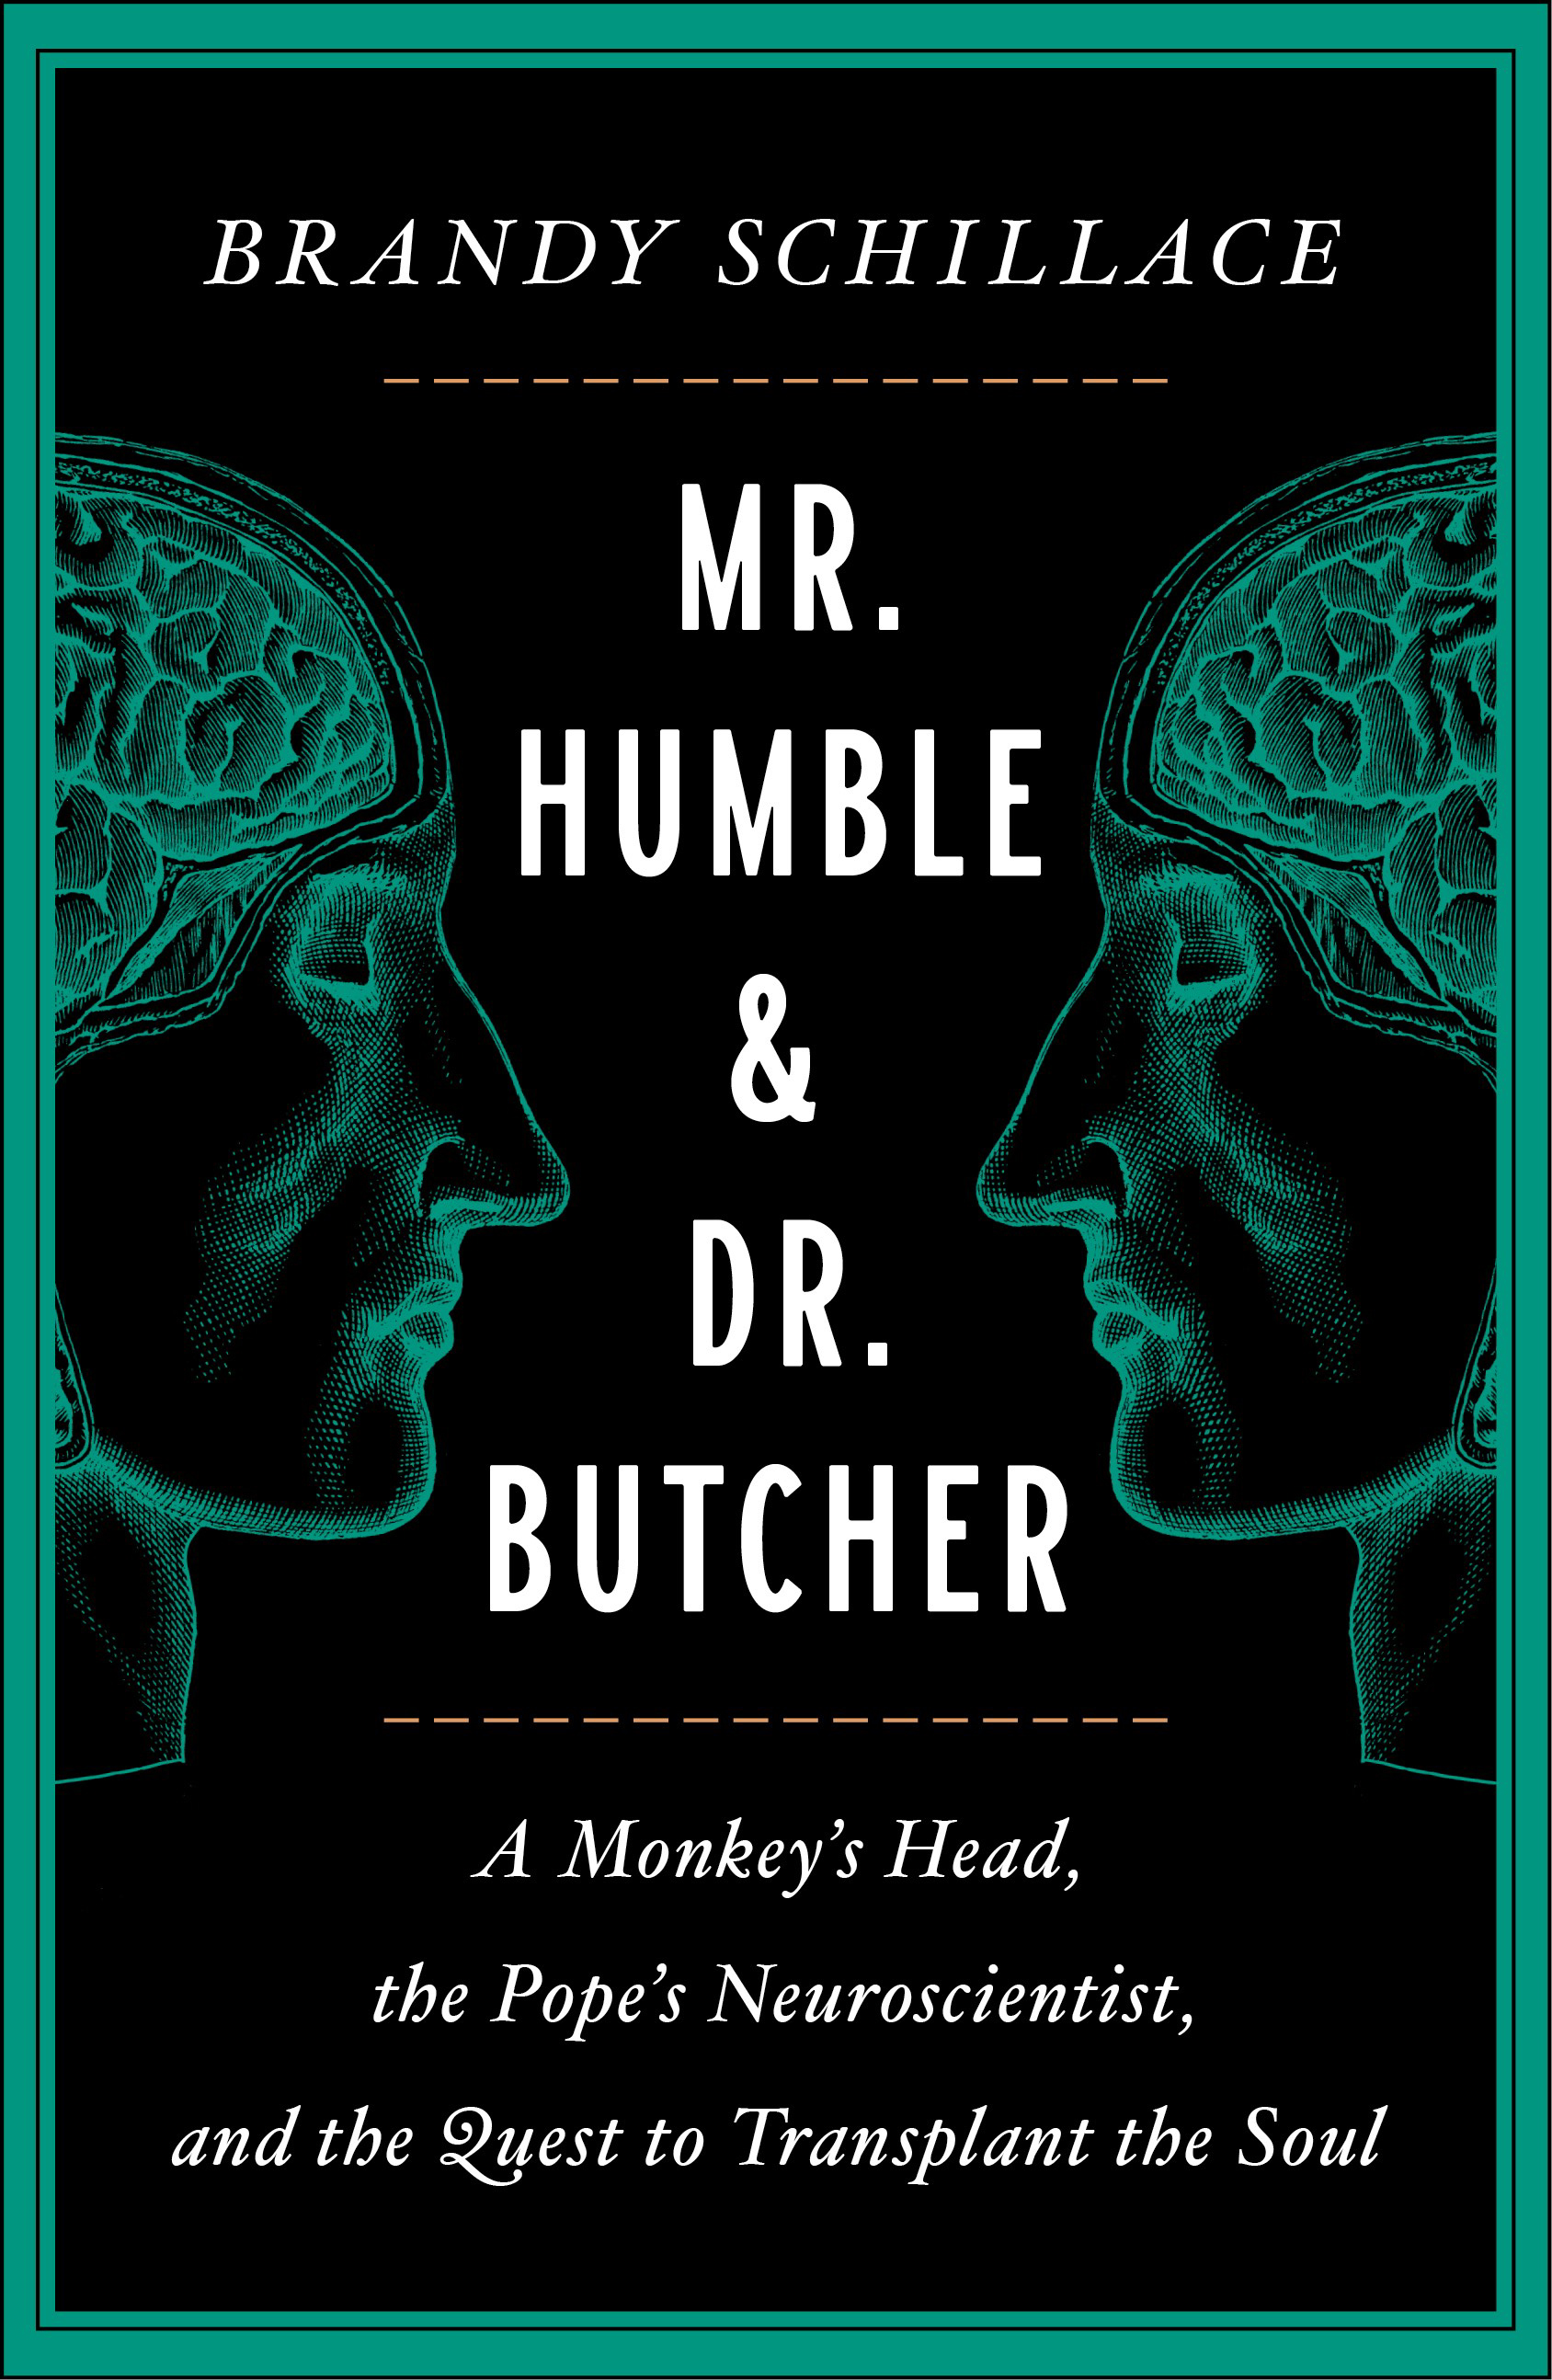 A black book cover with the light-green tracing of the human head and brain mirrored on both sides. The title appears centered between.